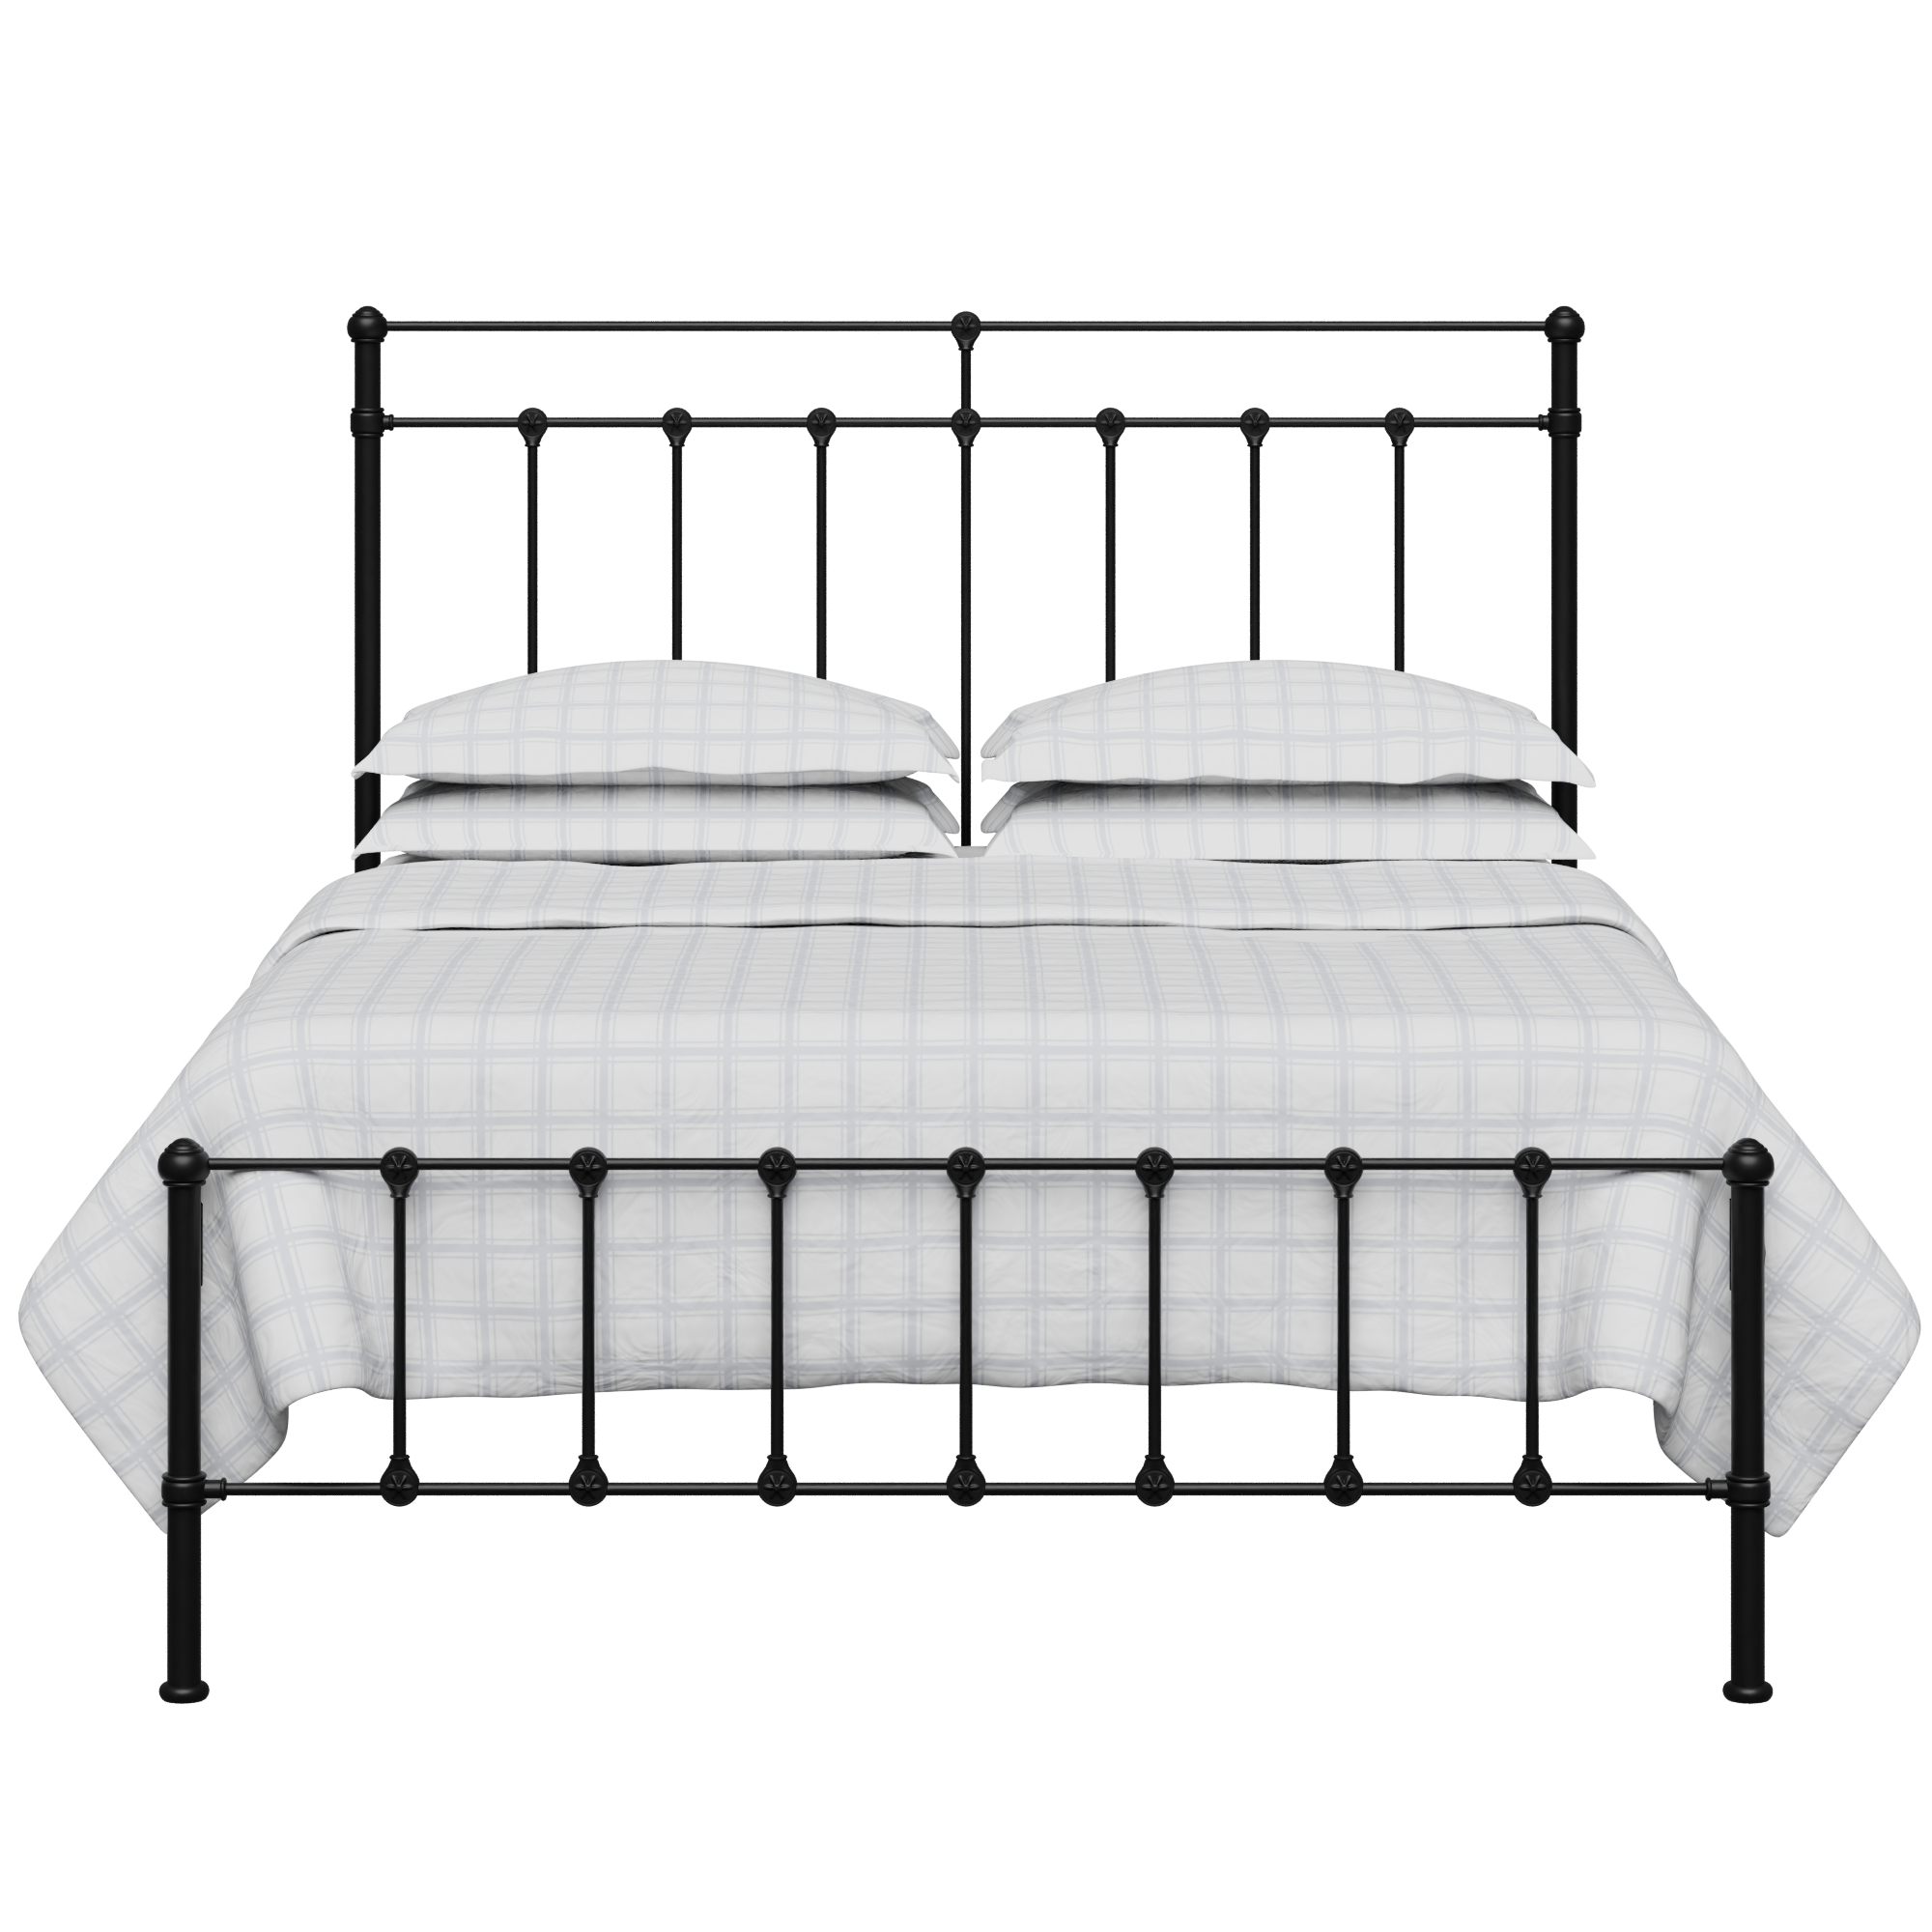 Ashley Iron Metal Bed Frame The, 39 X 80 Bed Frame Dimensions In Feet